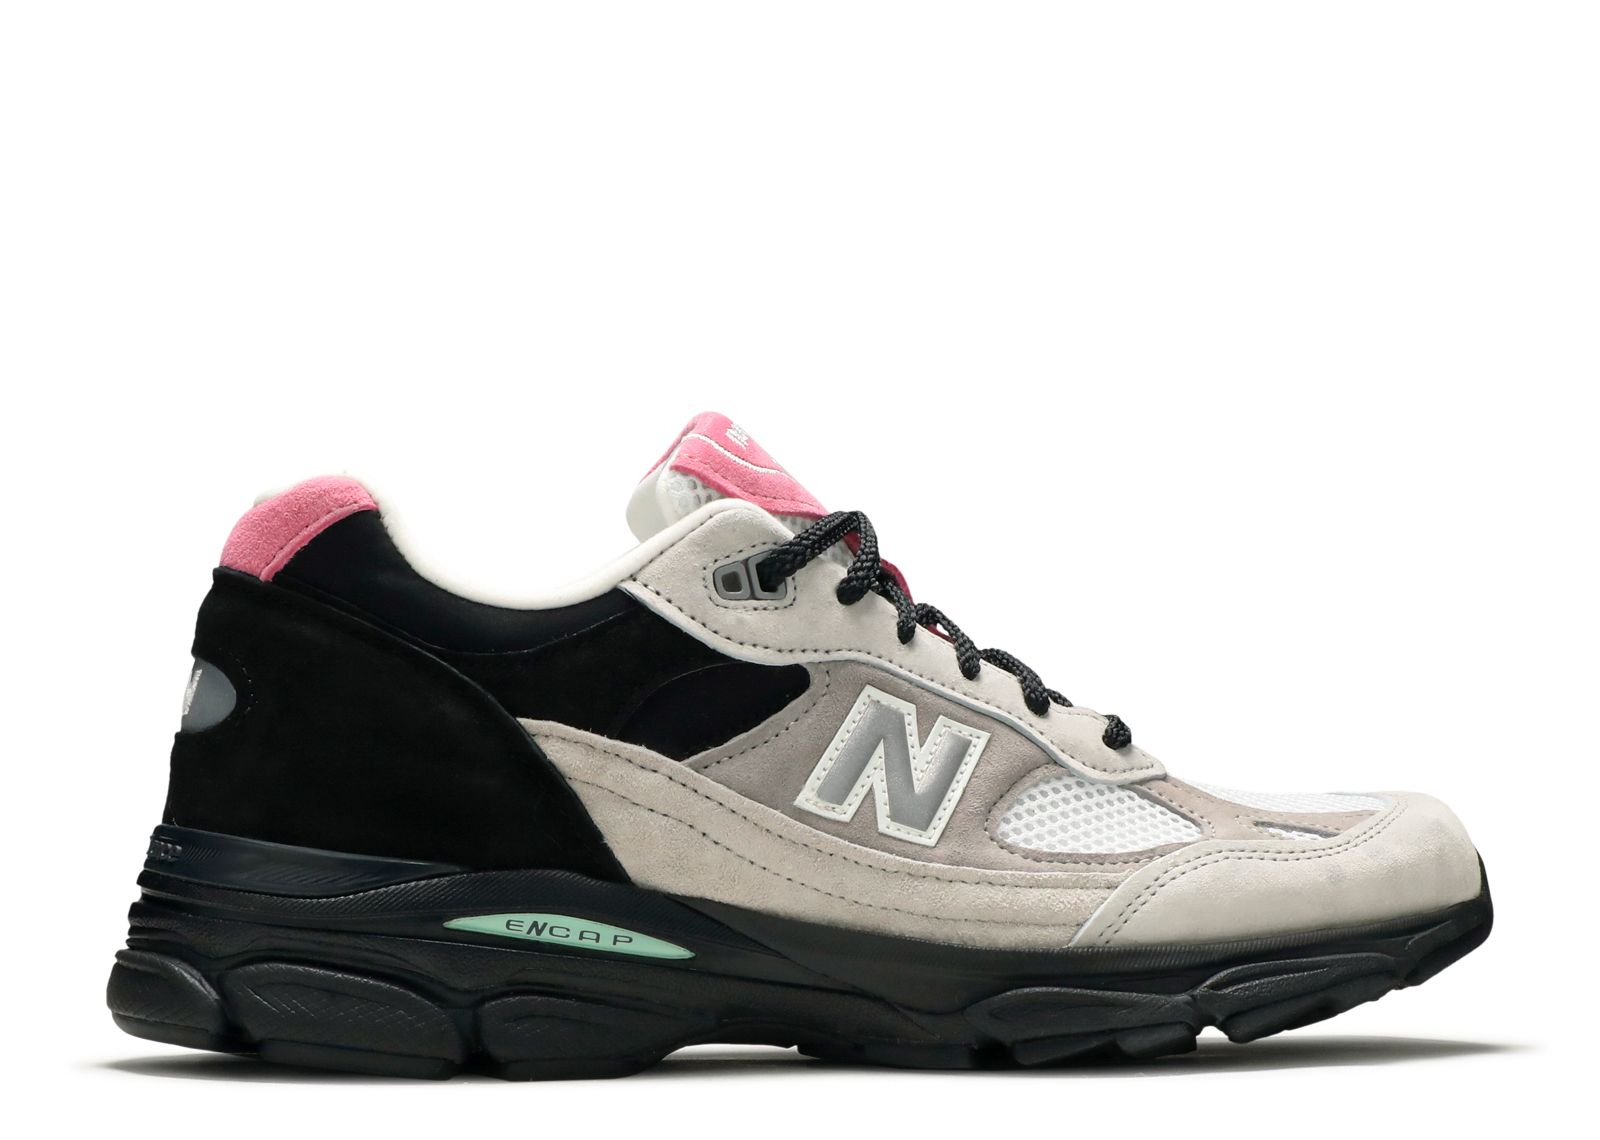 Кроссовки New Balance 991.9 Made In England 'Grey Pink', серый original dse6120 mkii amf controller generator control panel mains utility monitoring diesel genset part made in uk